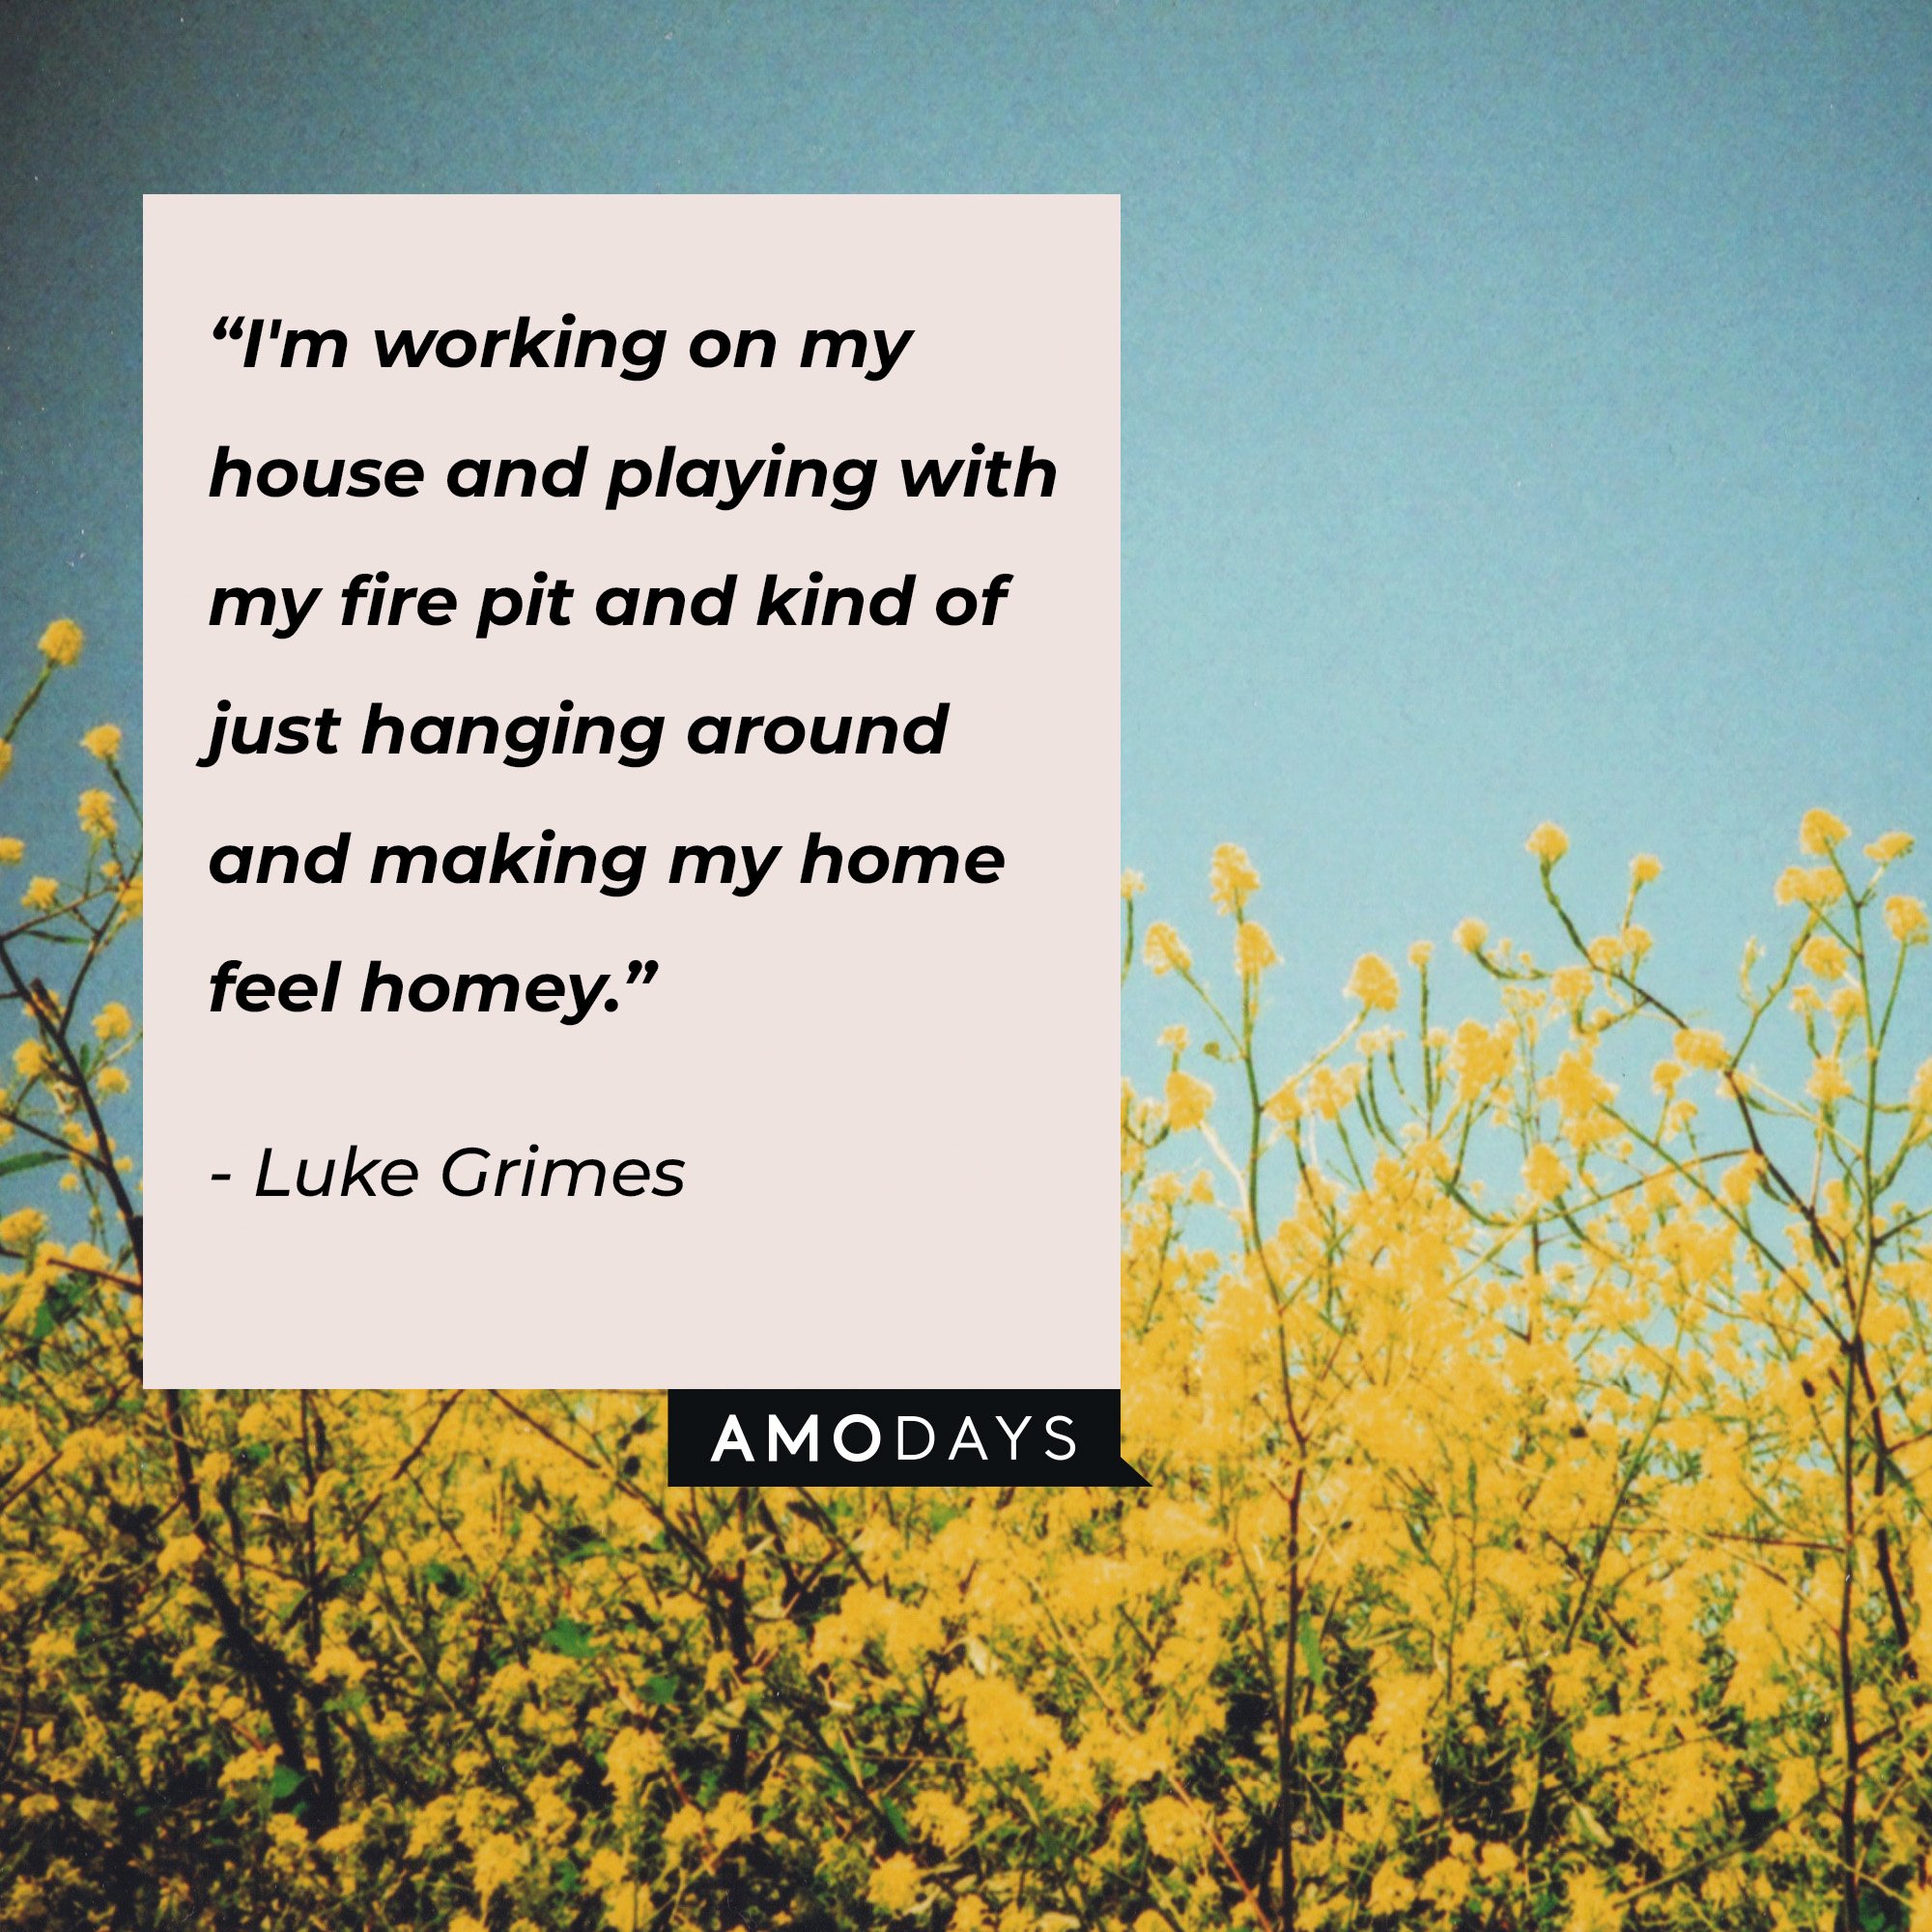  Luke Grimes's quote: “I'm working on my house and playing with my fire pit and kind of just hanging around and making my home feel homey.” | Image: AmoDays